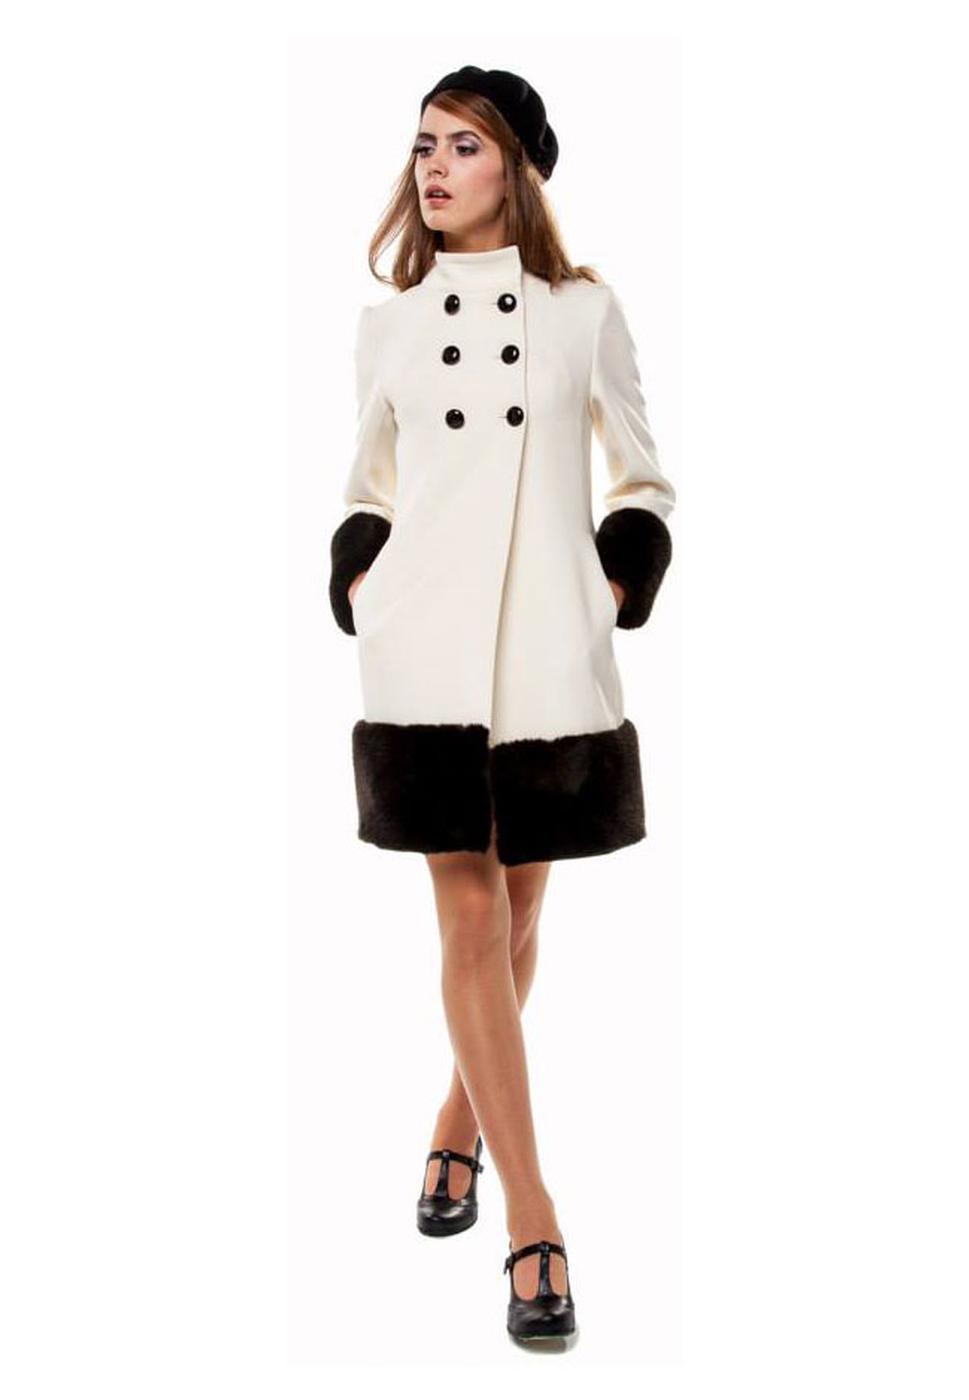 MARMALADE 60s Mod Winter Coat with Faux Fur Cuffs